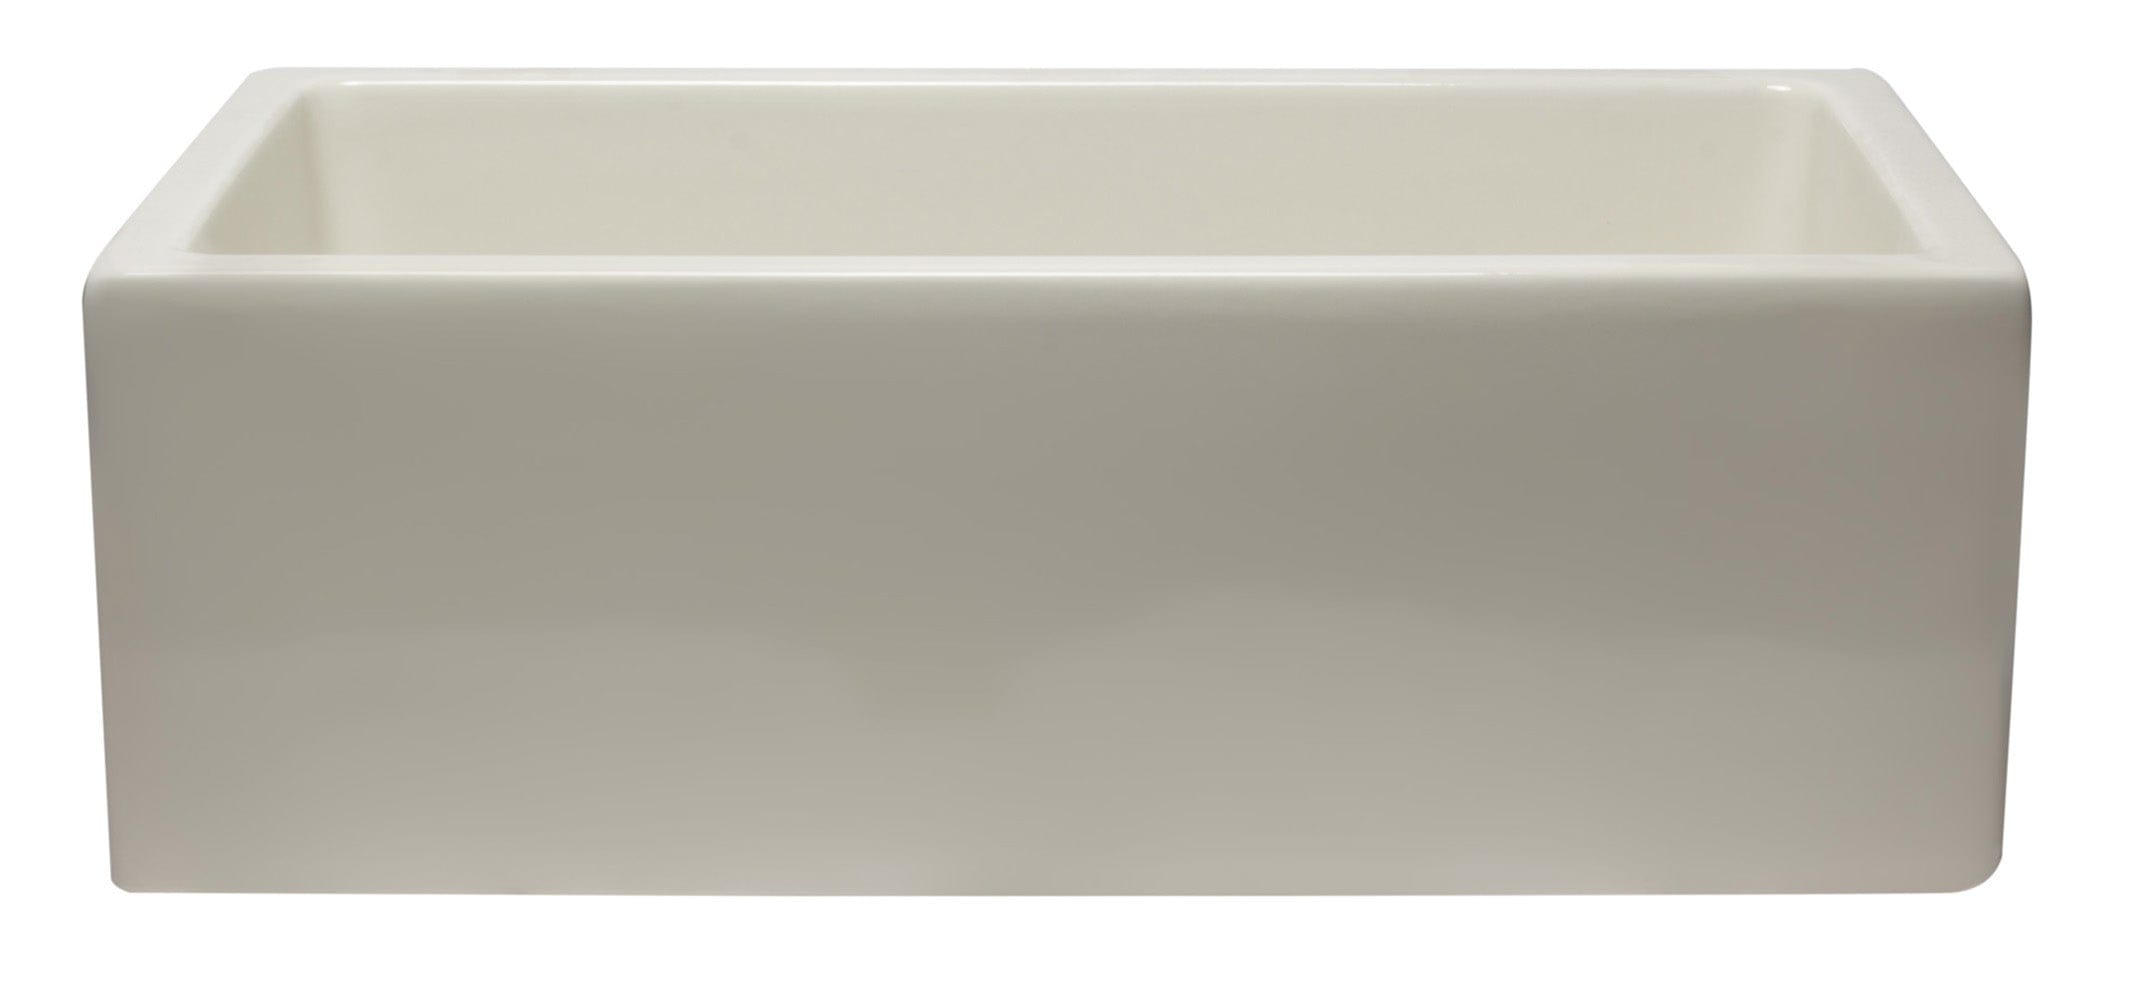 ALFI 30" Biscuit Reversible Smooth / Fluted Single Bowl Fireclay Farm Sink AB3018HS-B